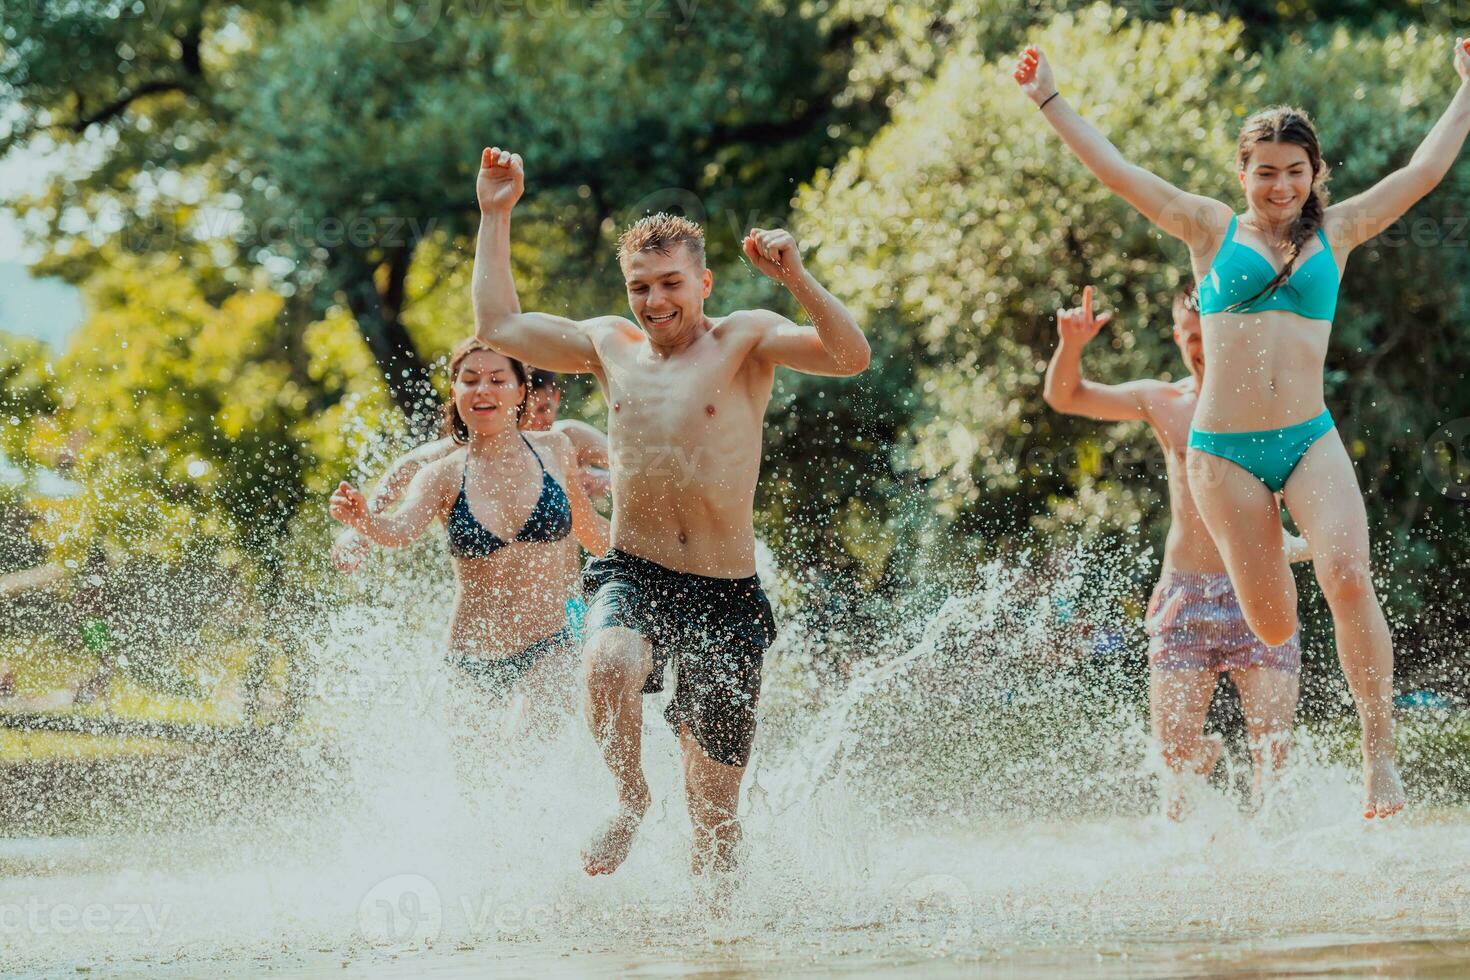 A group of diverse young people having fun together as they run along the river and play water games photo